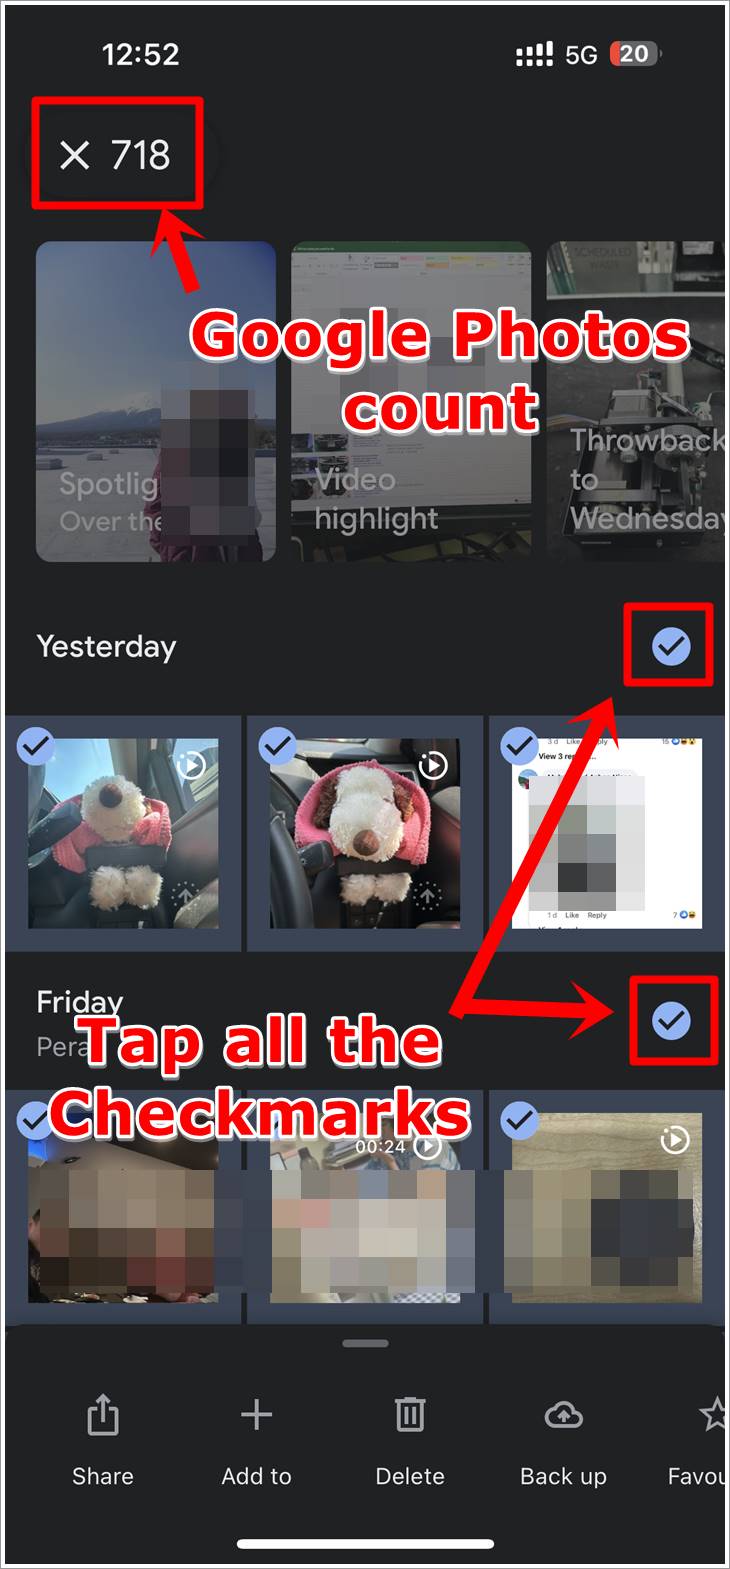 This is a screenshot from an iPhone. It features the Google Photos with all the saved photos and images. All the 'Checkmarks' adjacent to the dates, and the photos count in the top-left are highlighted.